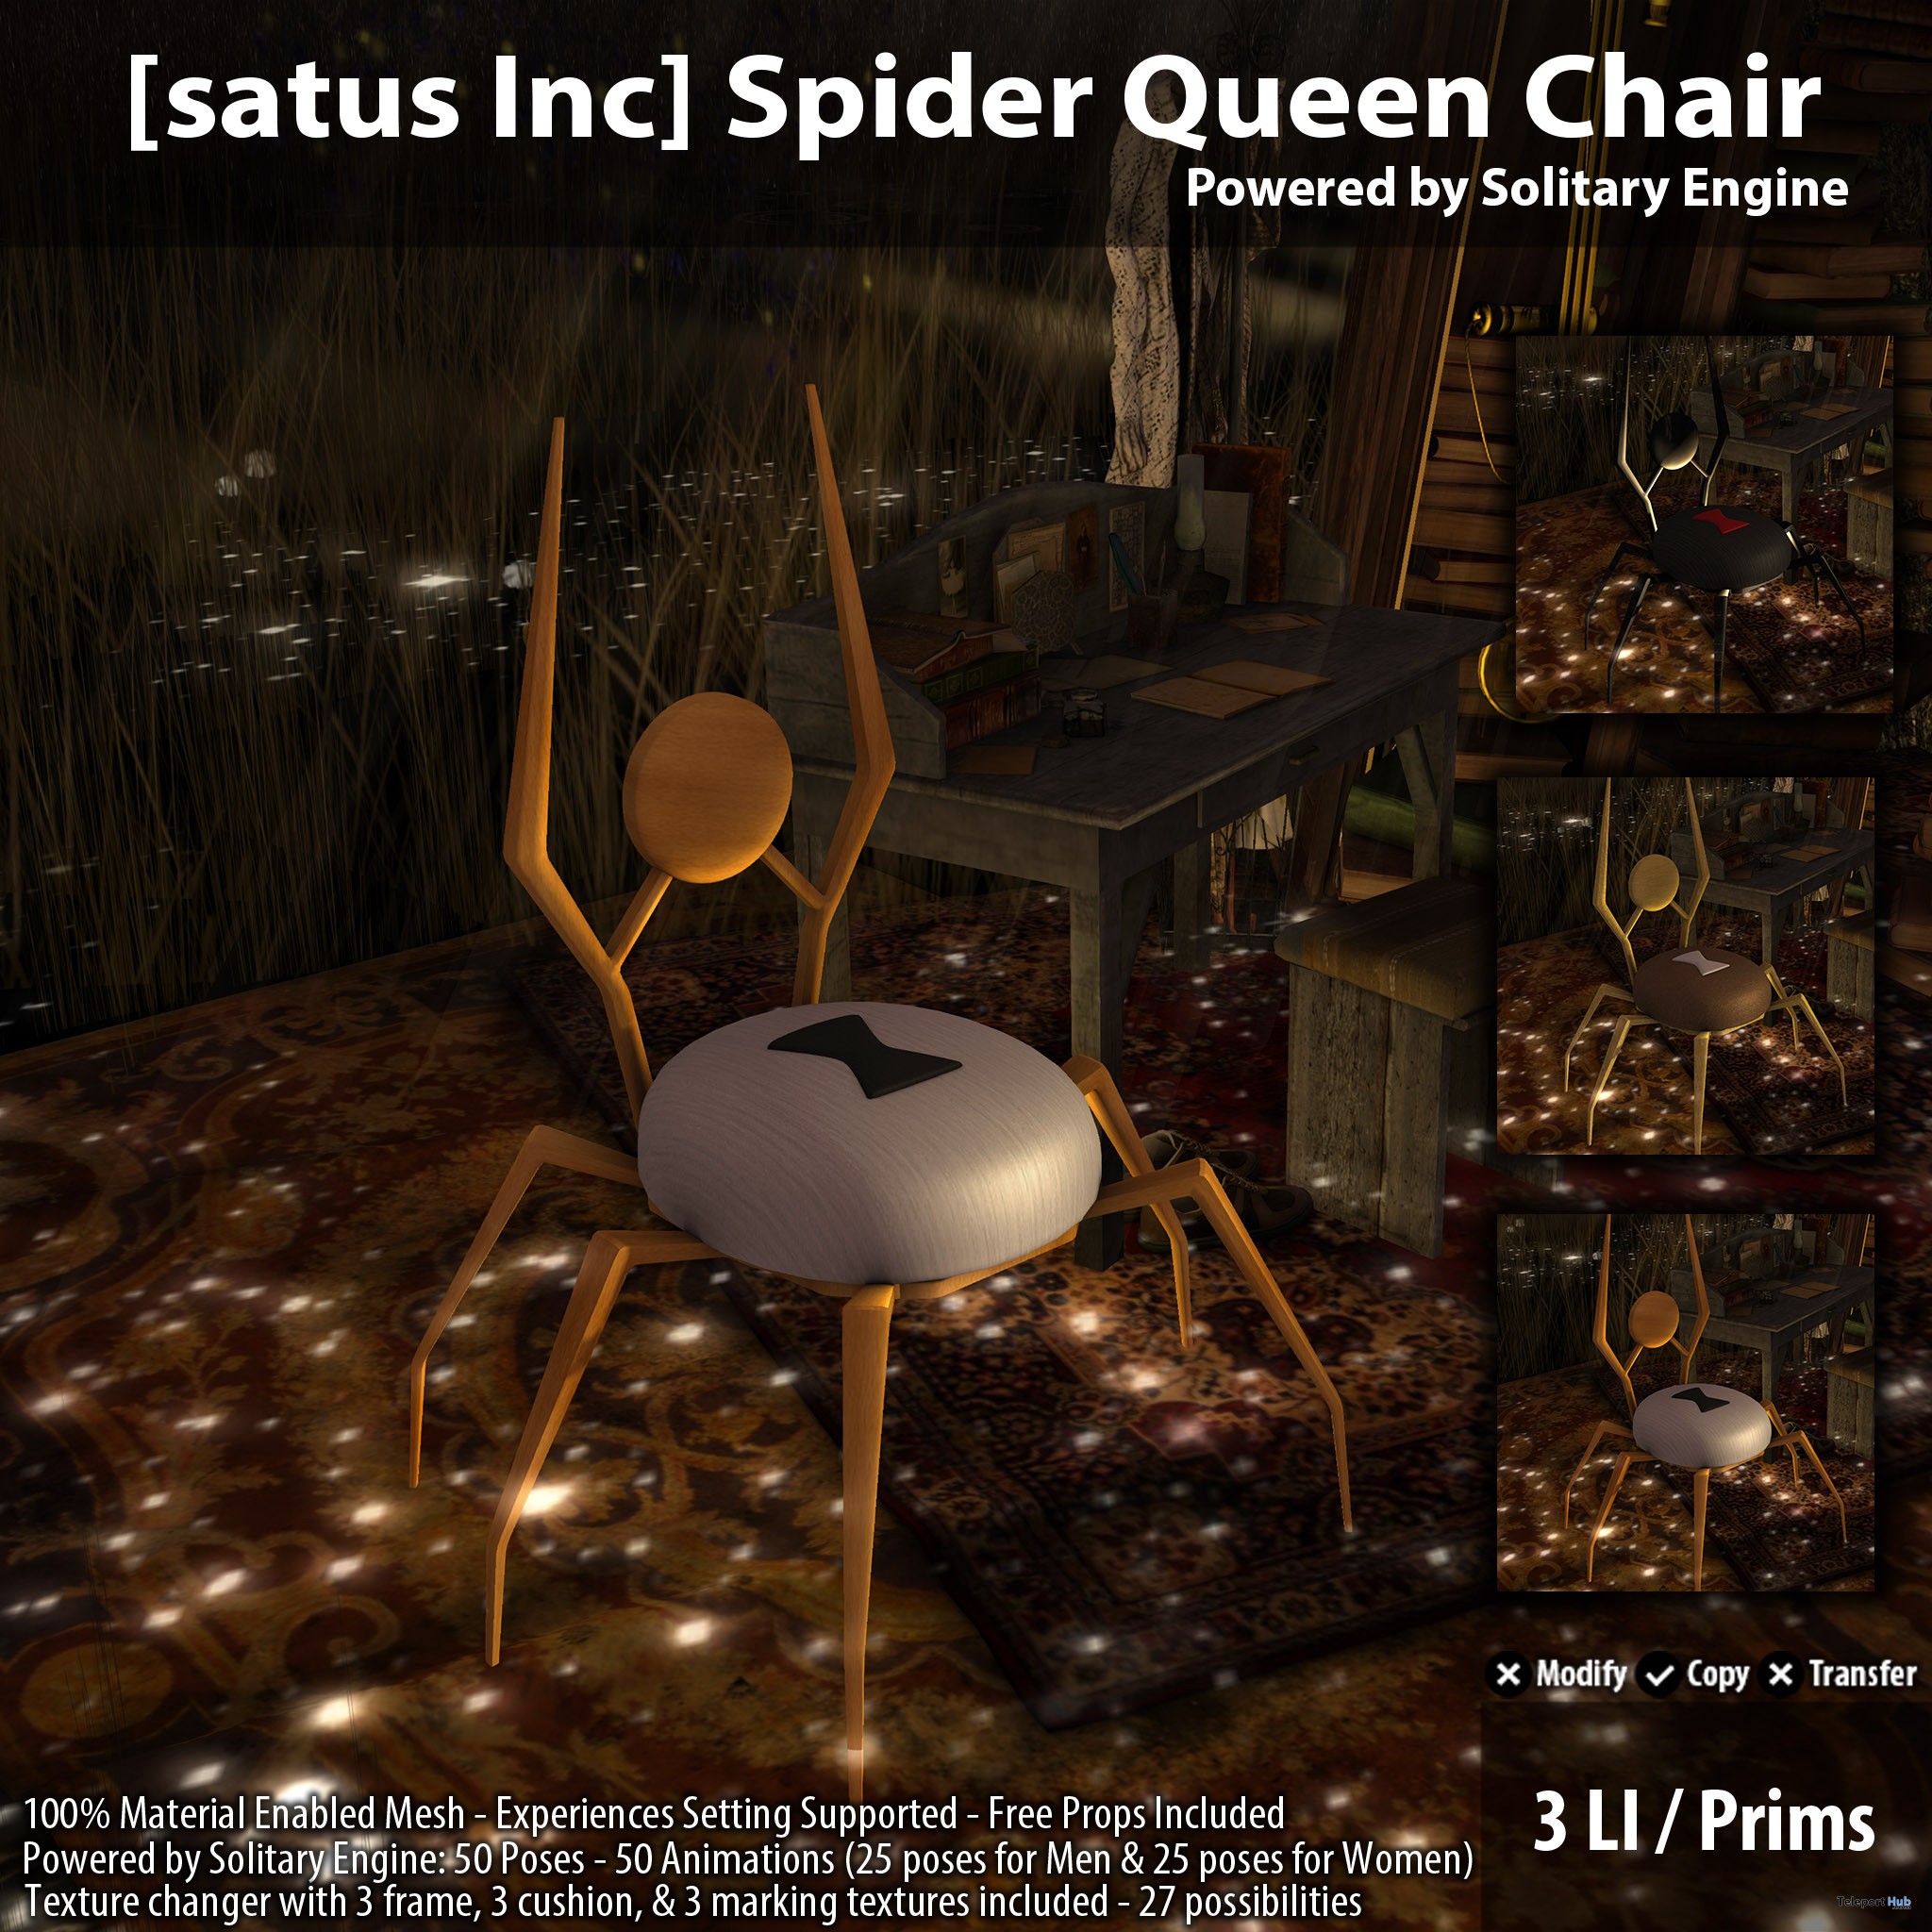 New Release: Spider Queen Chair by [satus Inc] - Teleport Hub - teleporthub.com